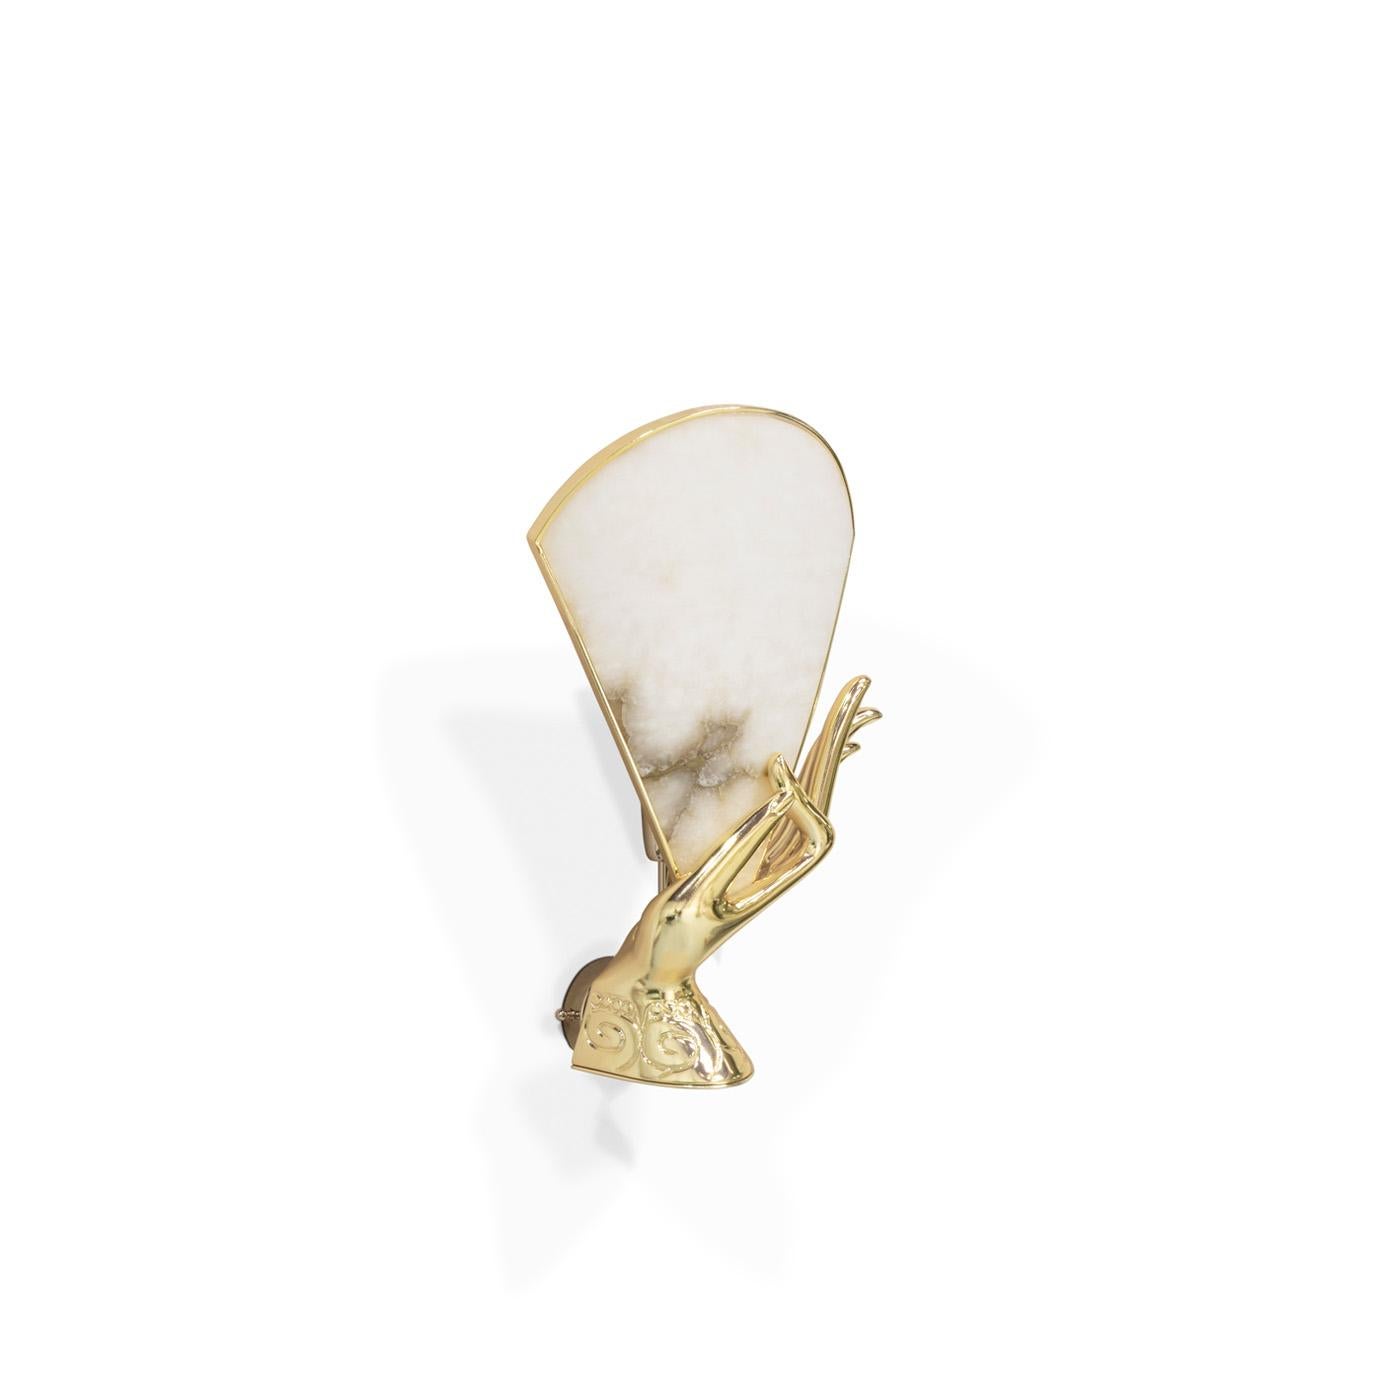 Aroused by all that is beautiful, her gold chromium hand delicately grasps an alabaster fan attempting to cool the glowing heat of her inner light. The Muse Sconce will inspire its voyeurs with its radiant charm from any wall that she graces.
  